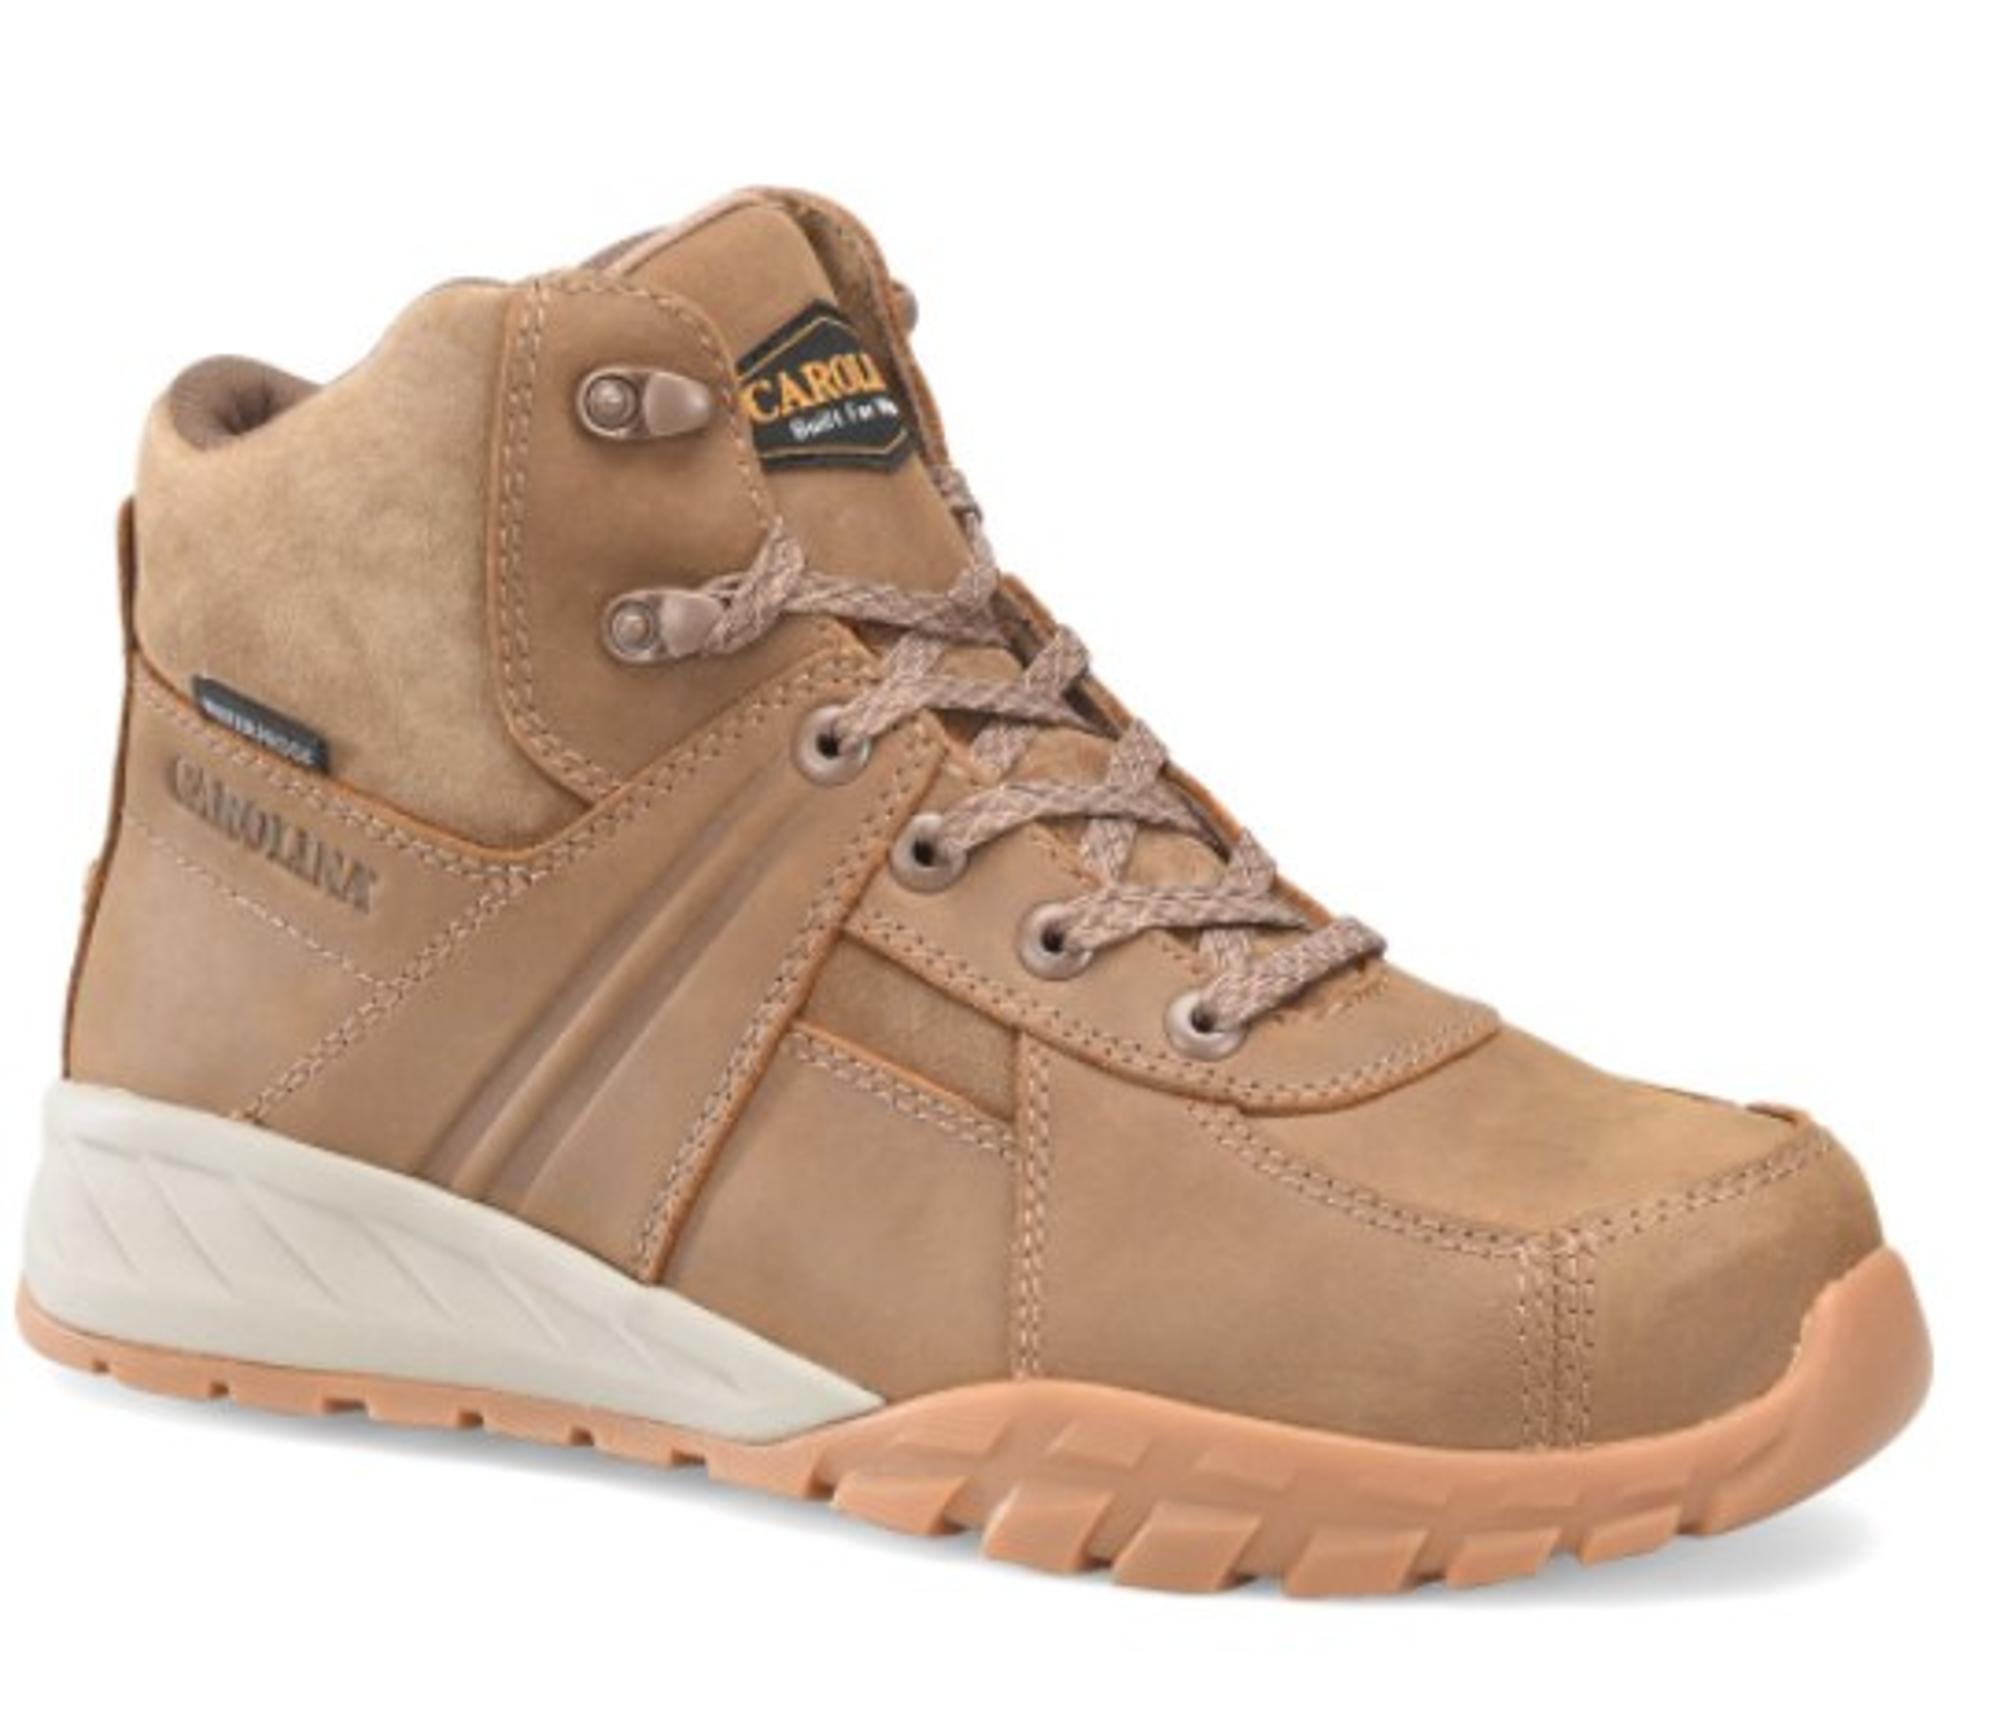 Force Composite Toe Hiking Boots